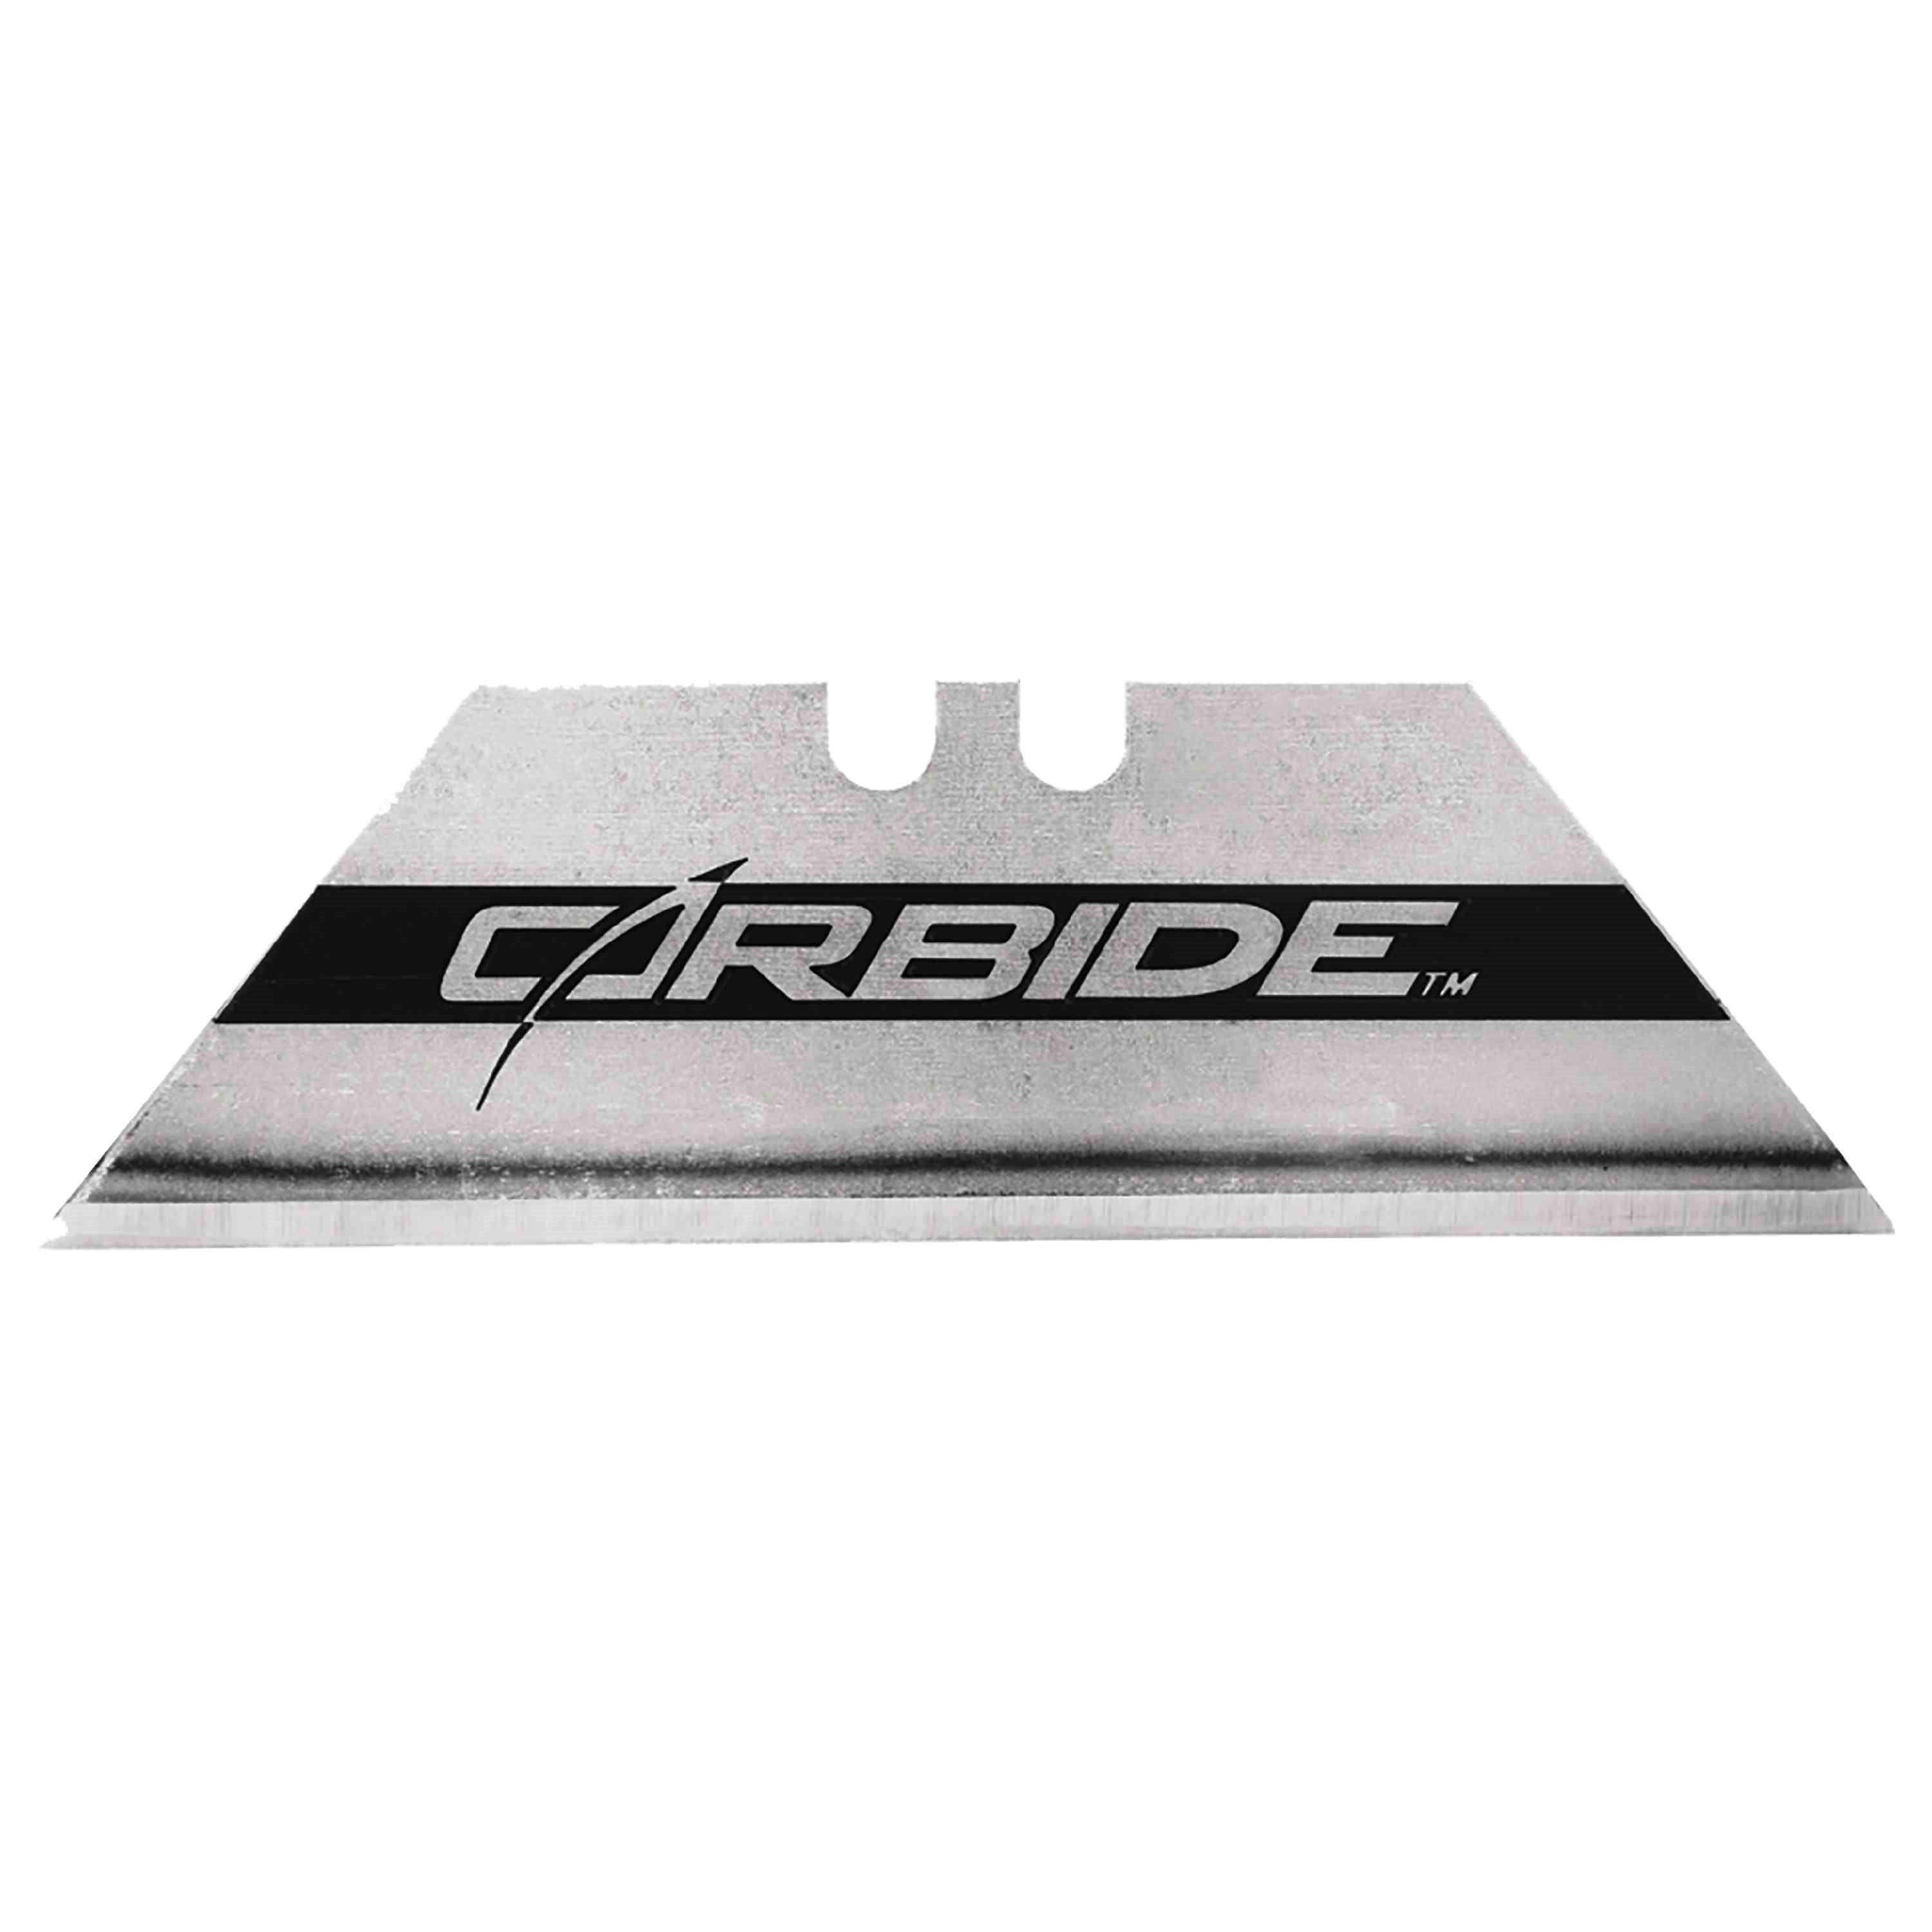 Stanley 11-800T Carbide Utility Blade (Pack of 10)